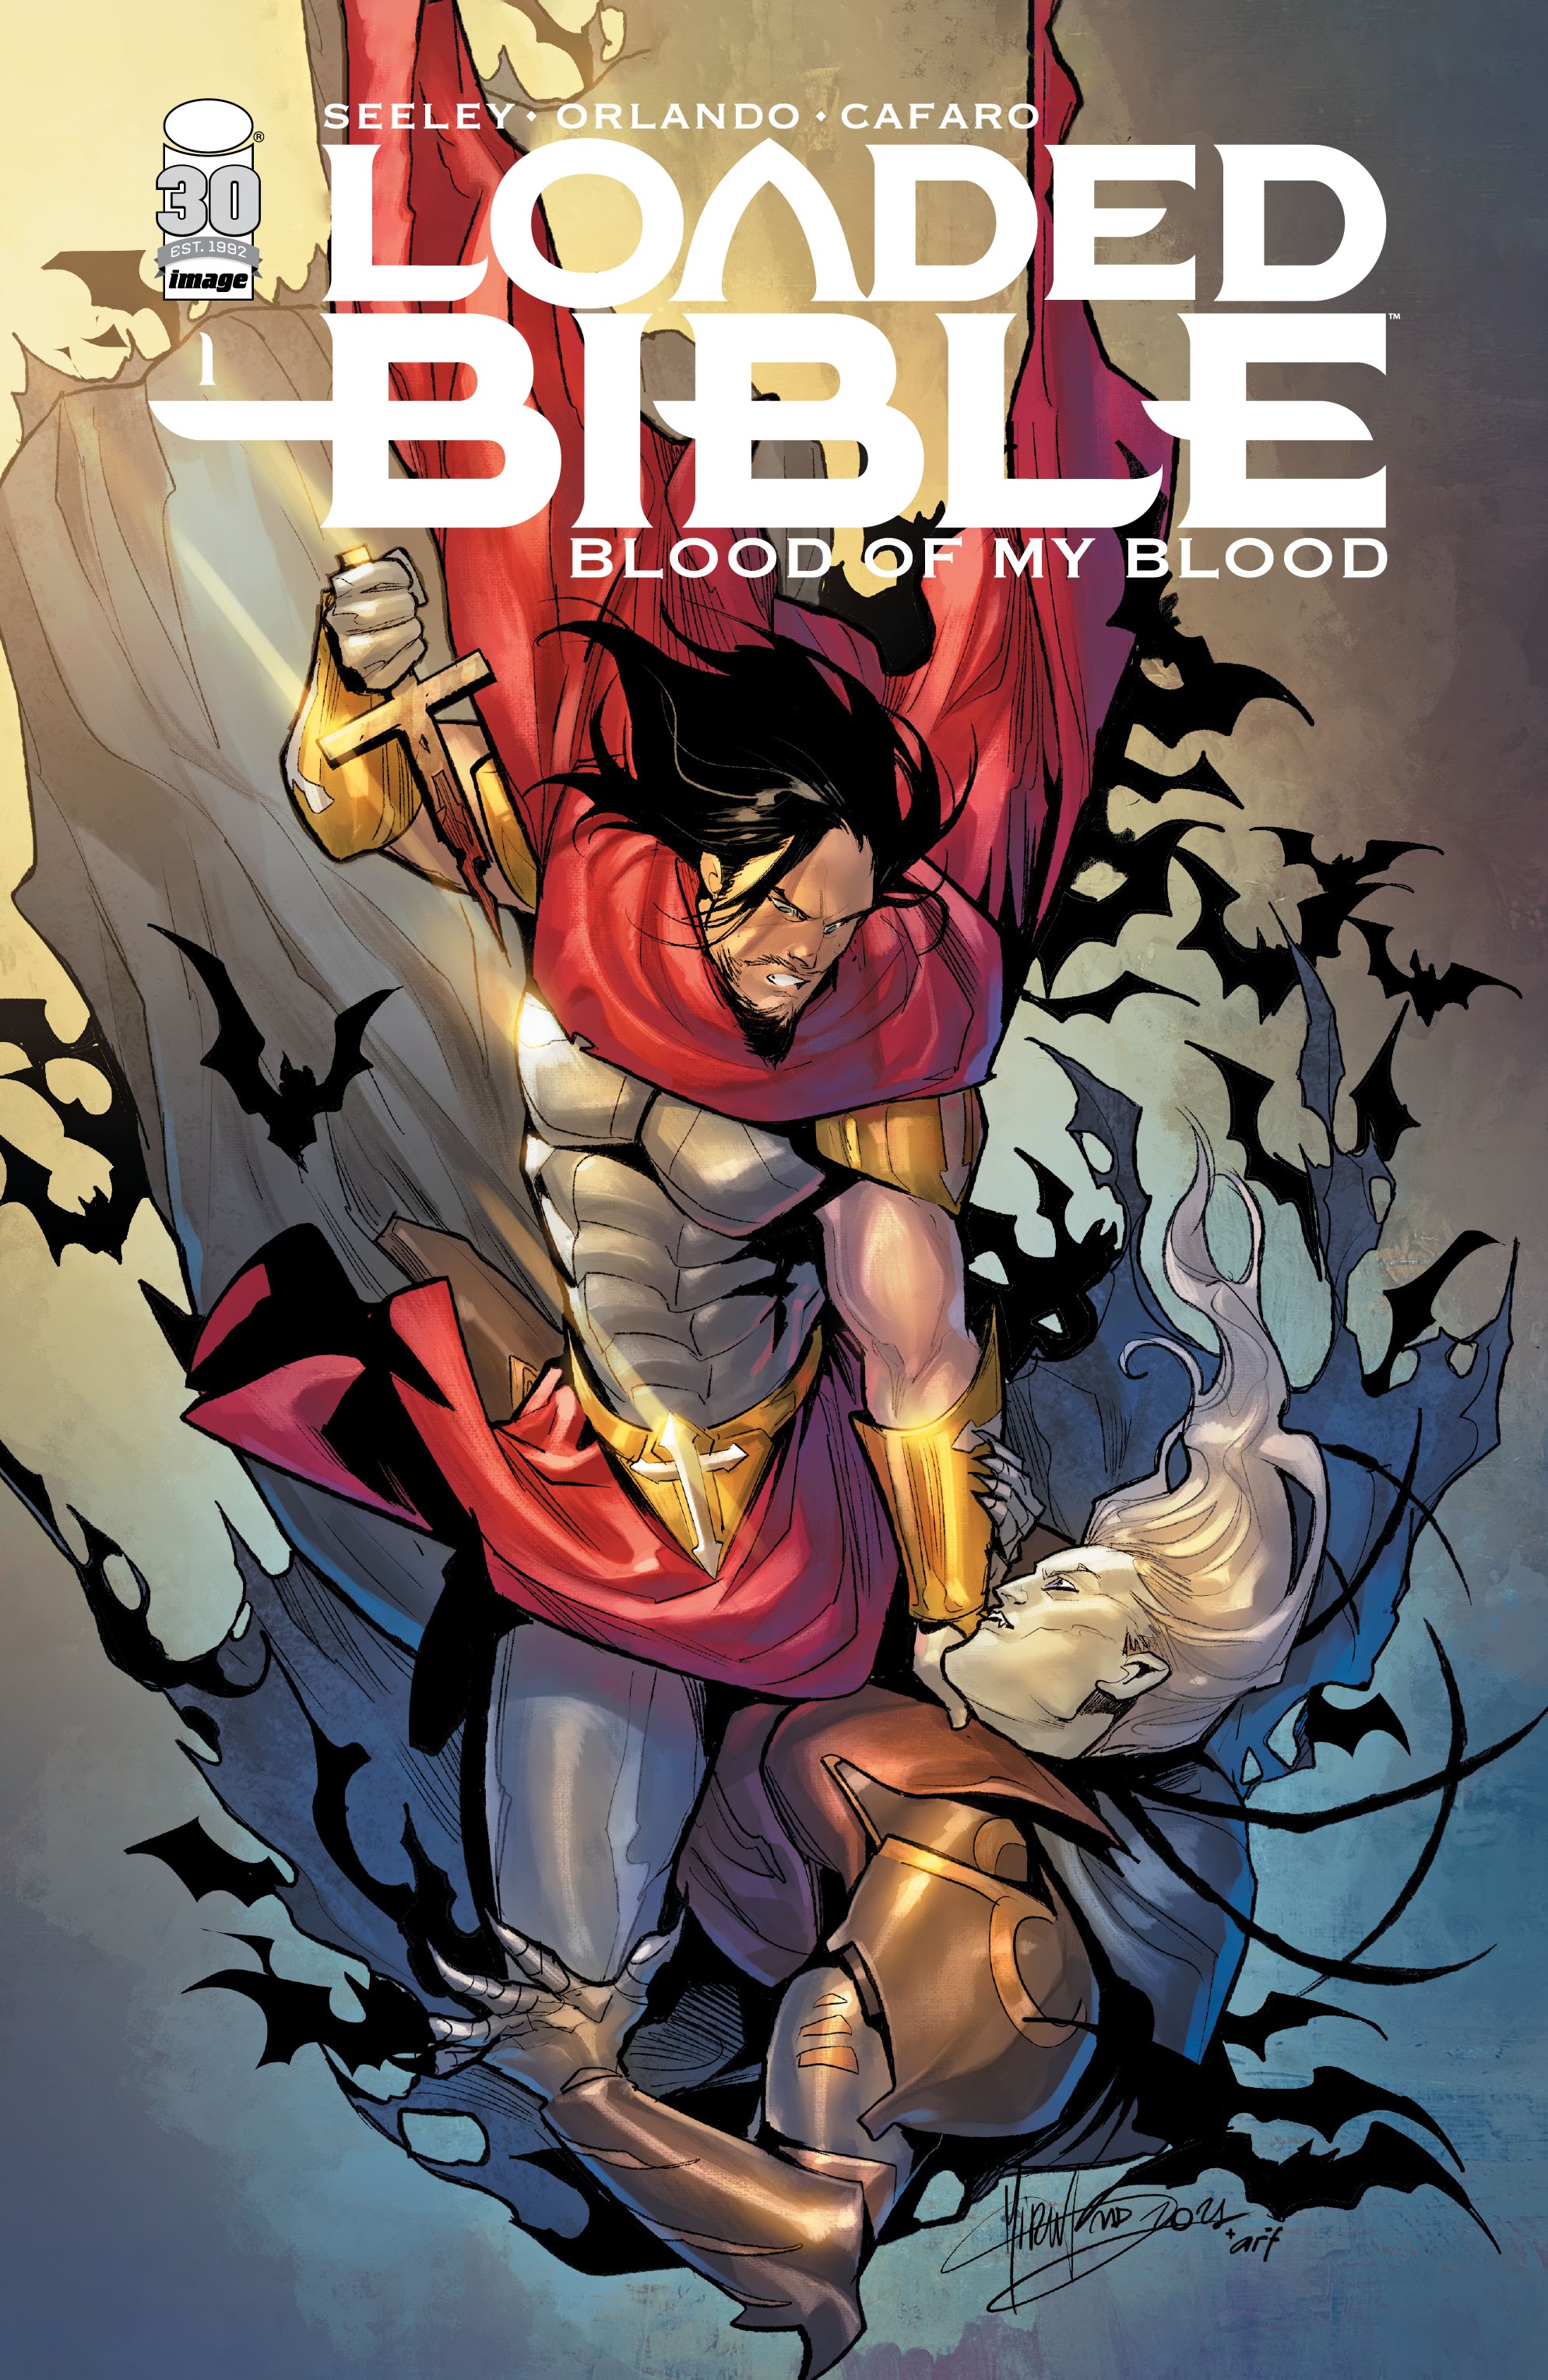 Read online Loaded Bible: Blood Of My Blood comic -  Issue #1 - 1